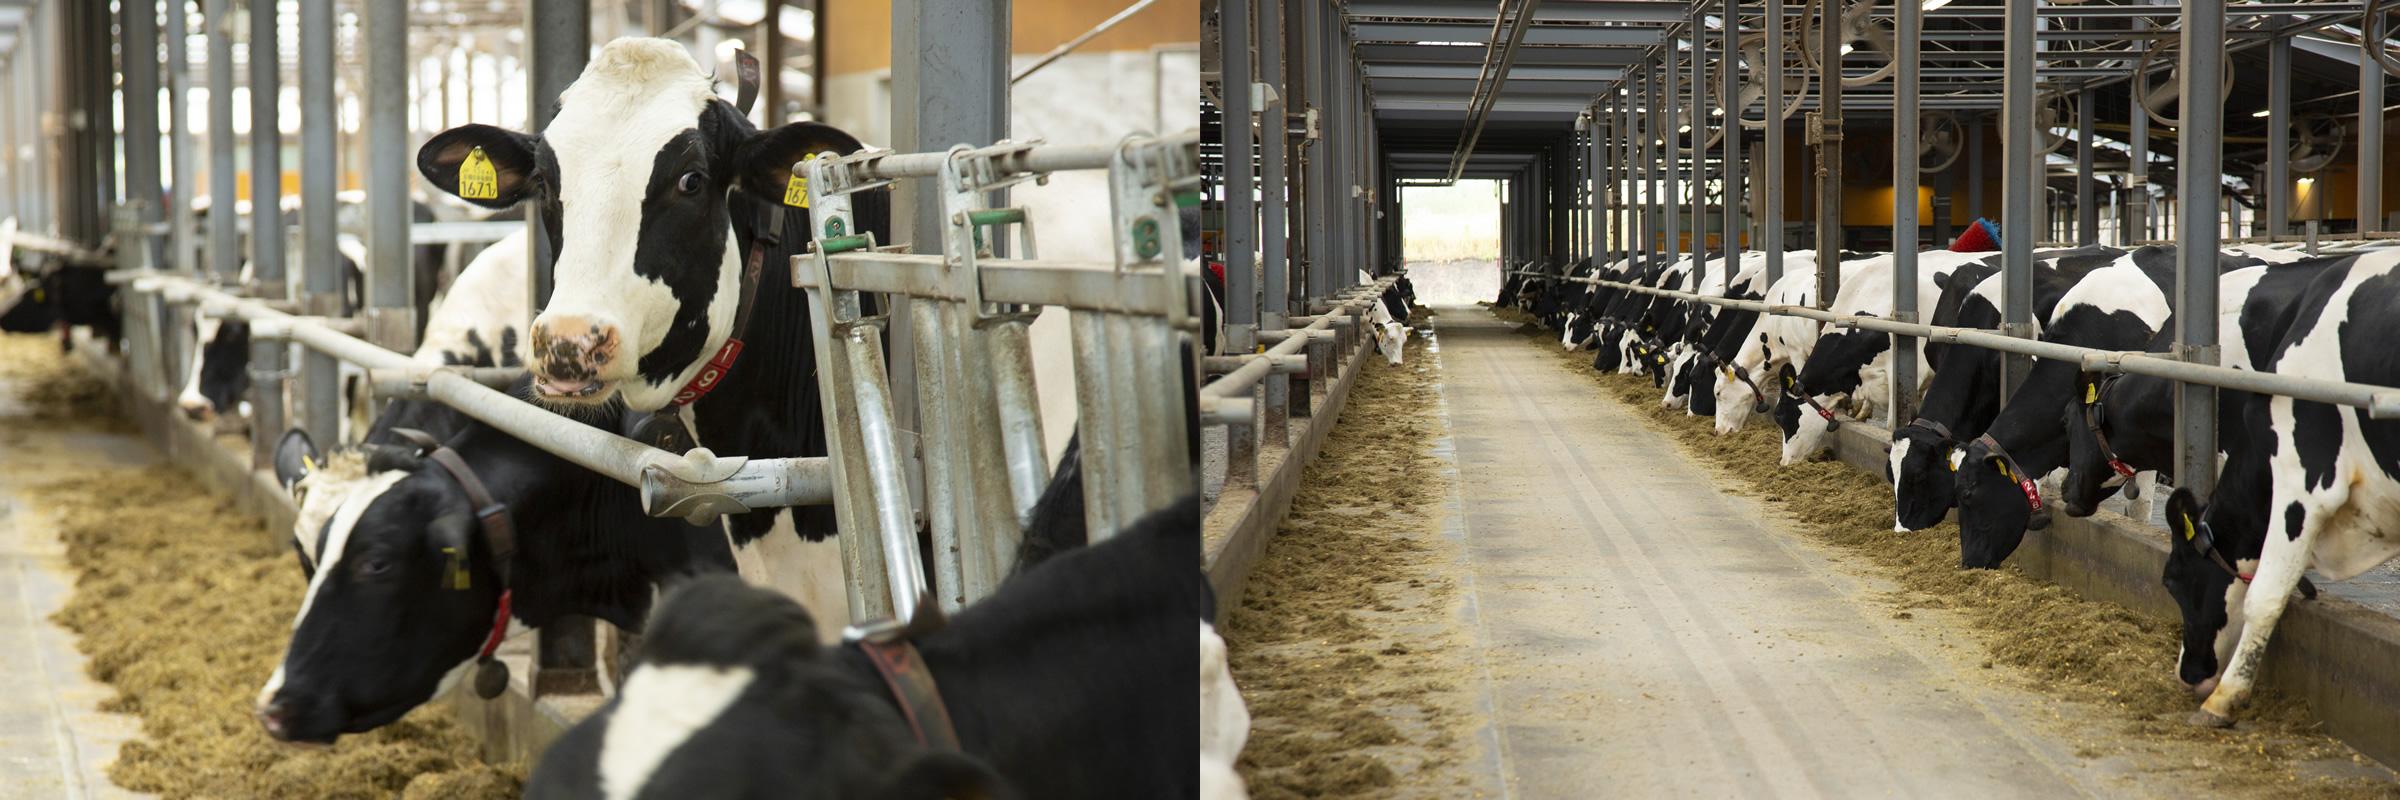 photo: Dairy farms require more work hours than the manufacturing industry.